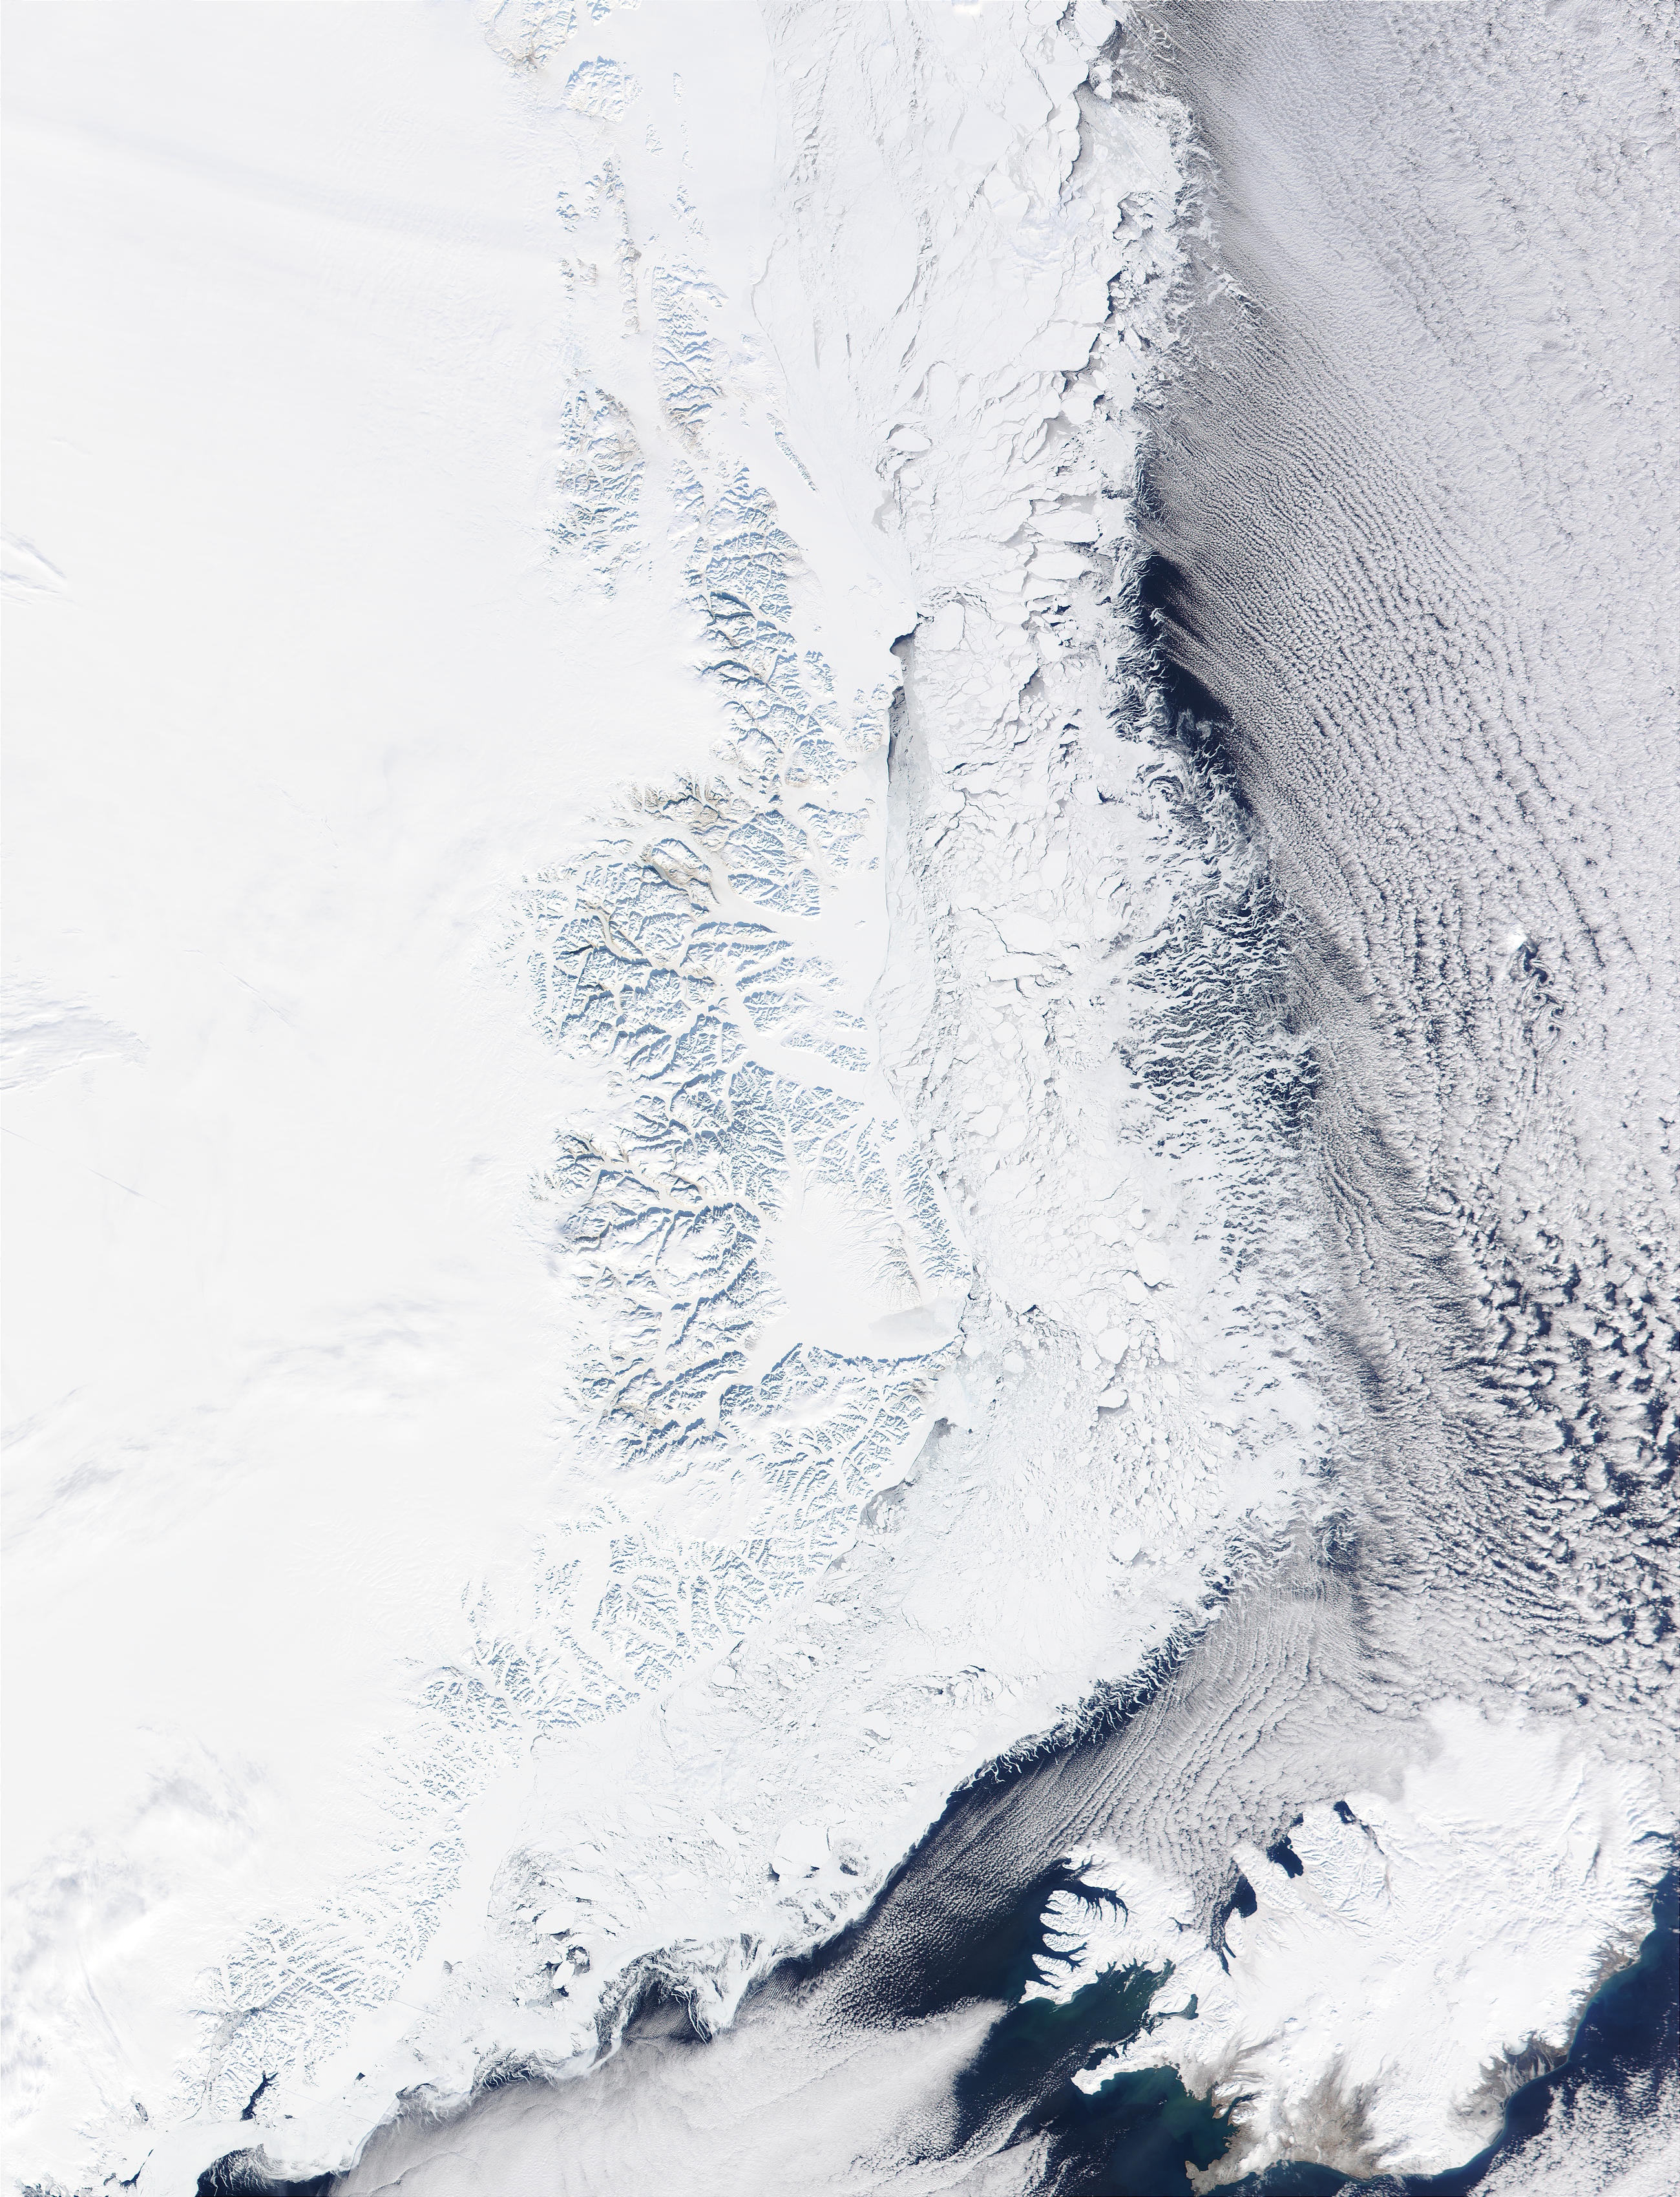 Southeast Greenland and Iceland - related image preview